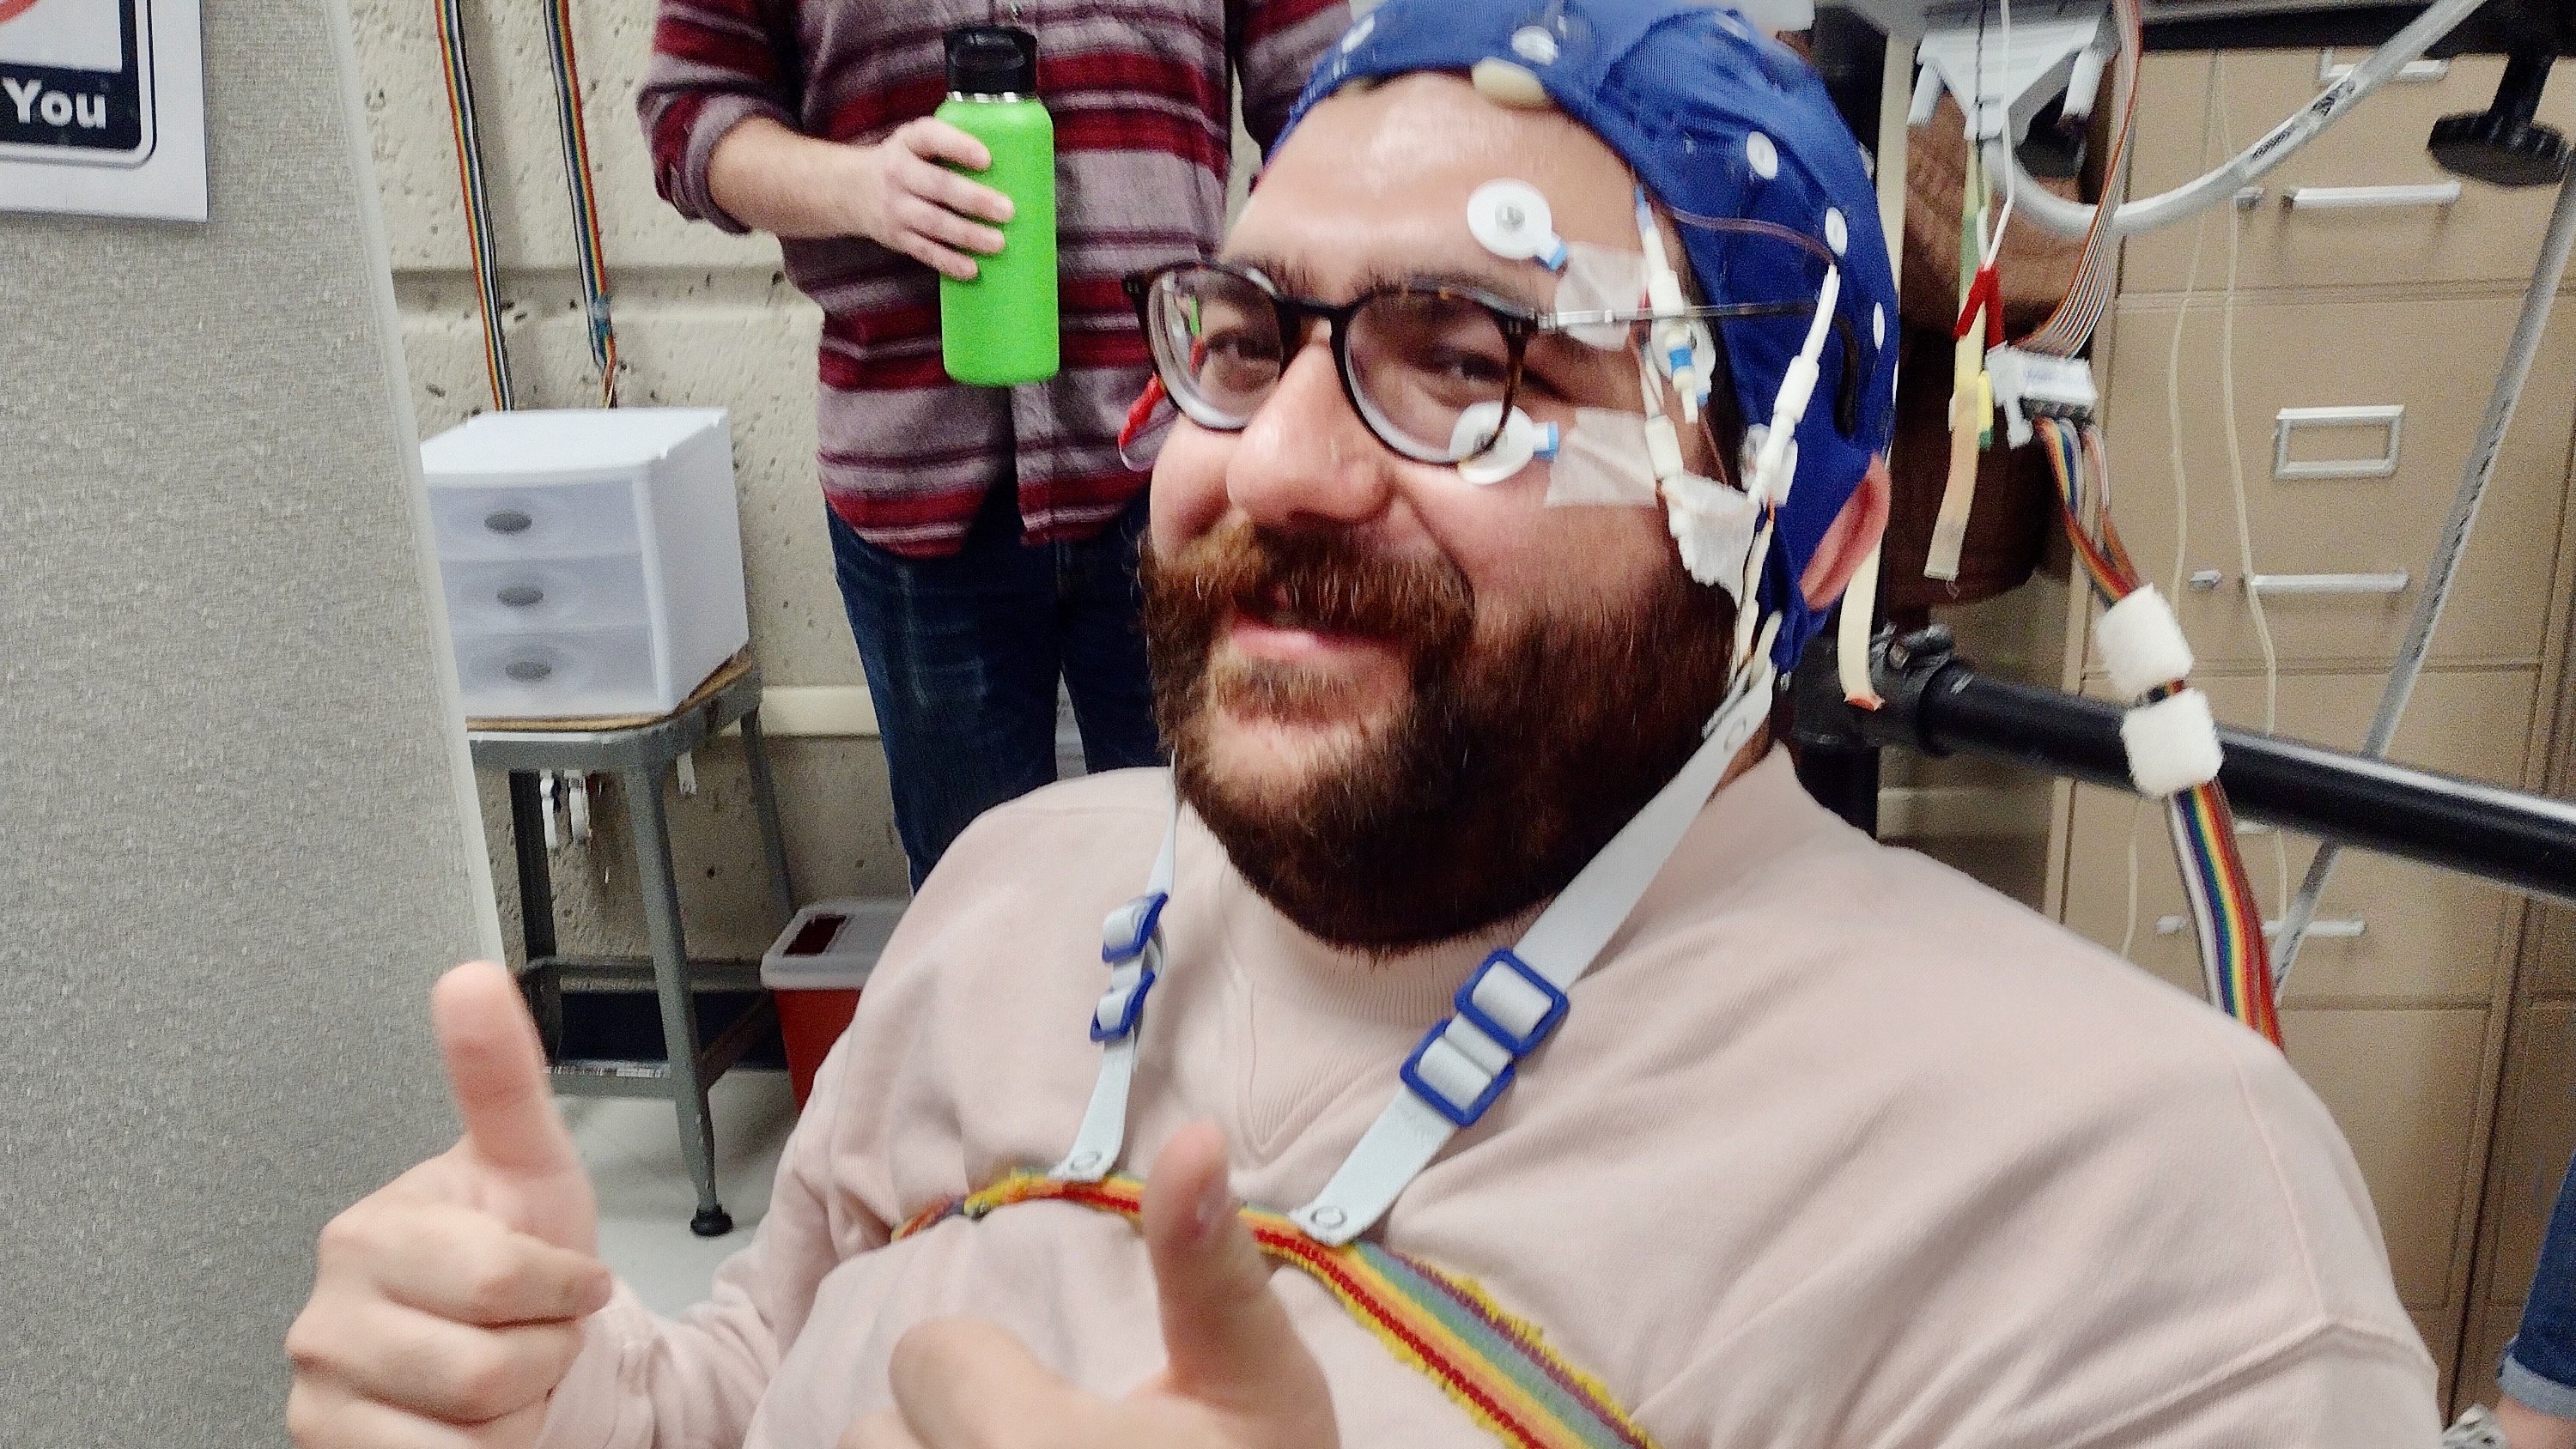 A man with a beard and glasses, with an cap on his head to measure the electrical activity of his brain, giving a double thumbs up.